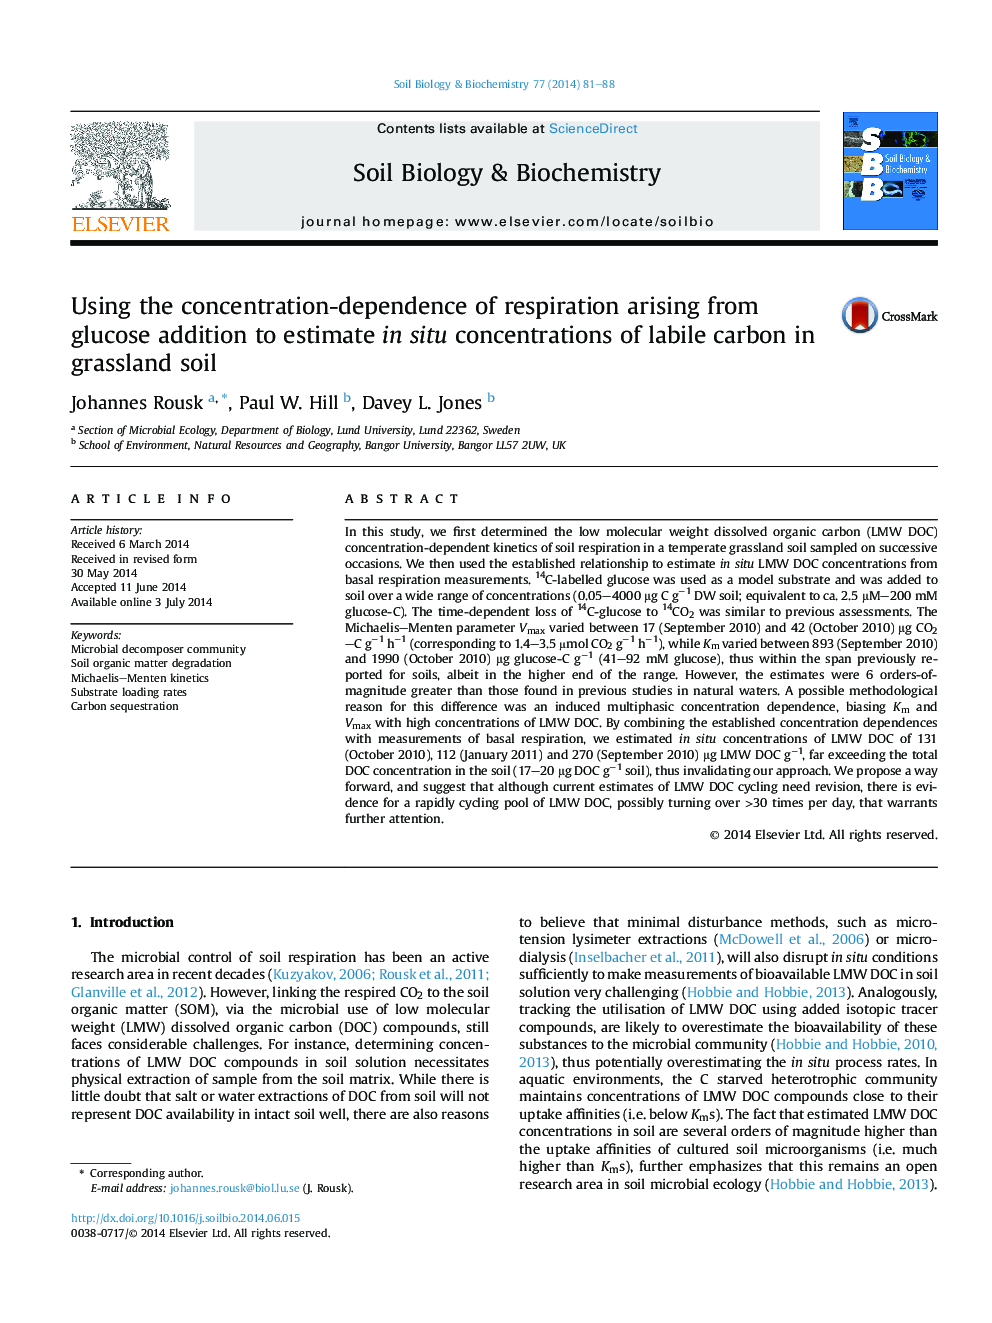 Using the concentration-dependence of respiration arising from glucose addition to estimate in situ concentrations of labile carbon in grassland soil